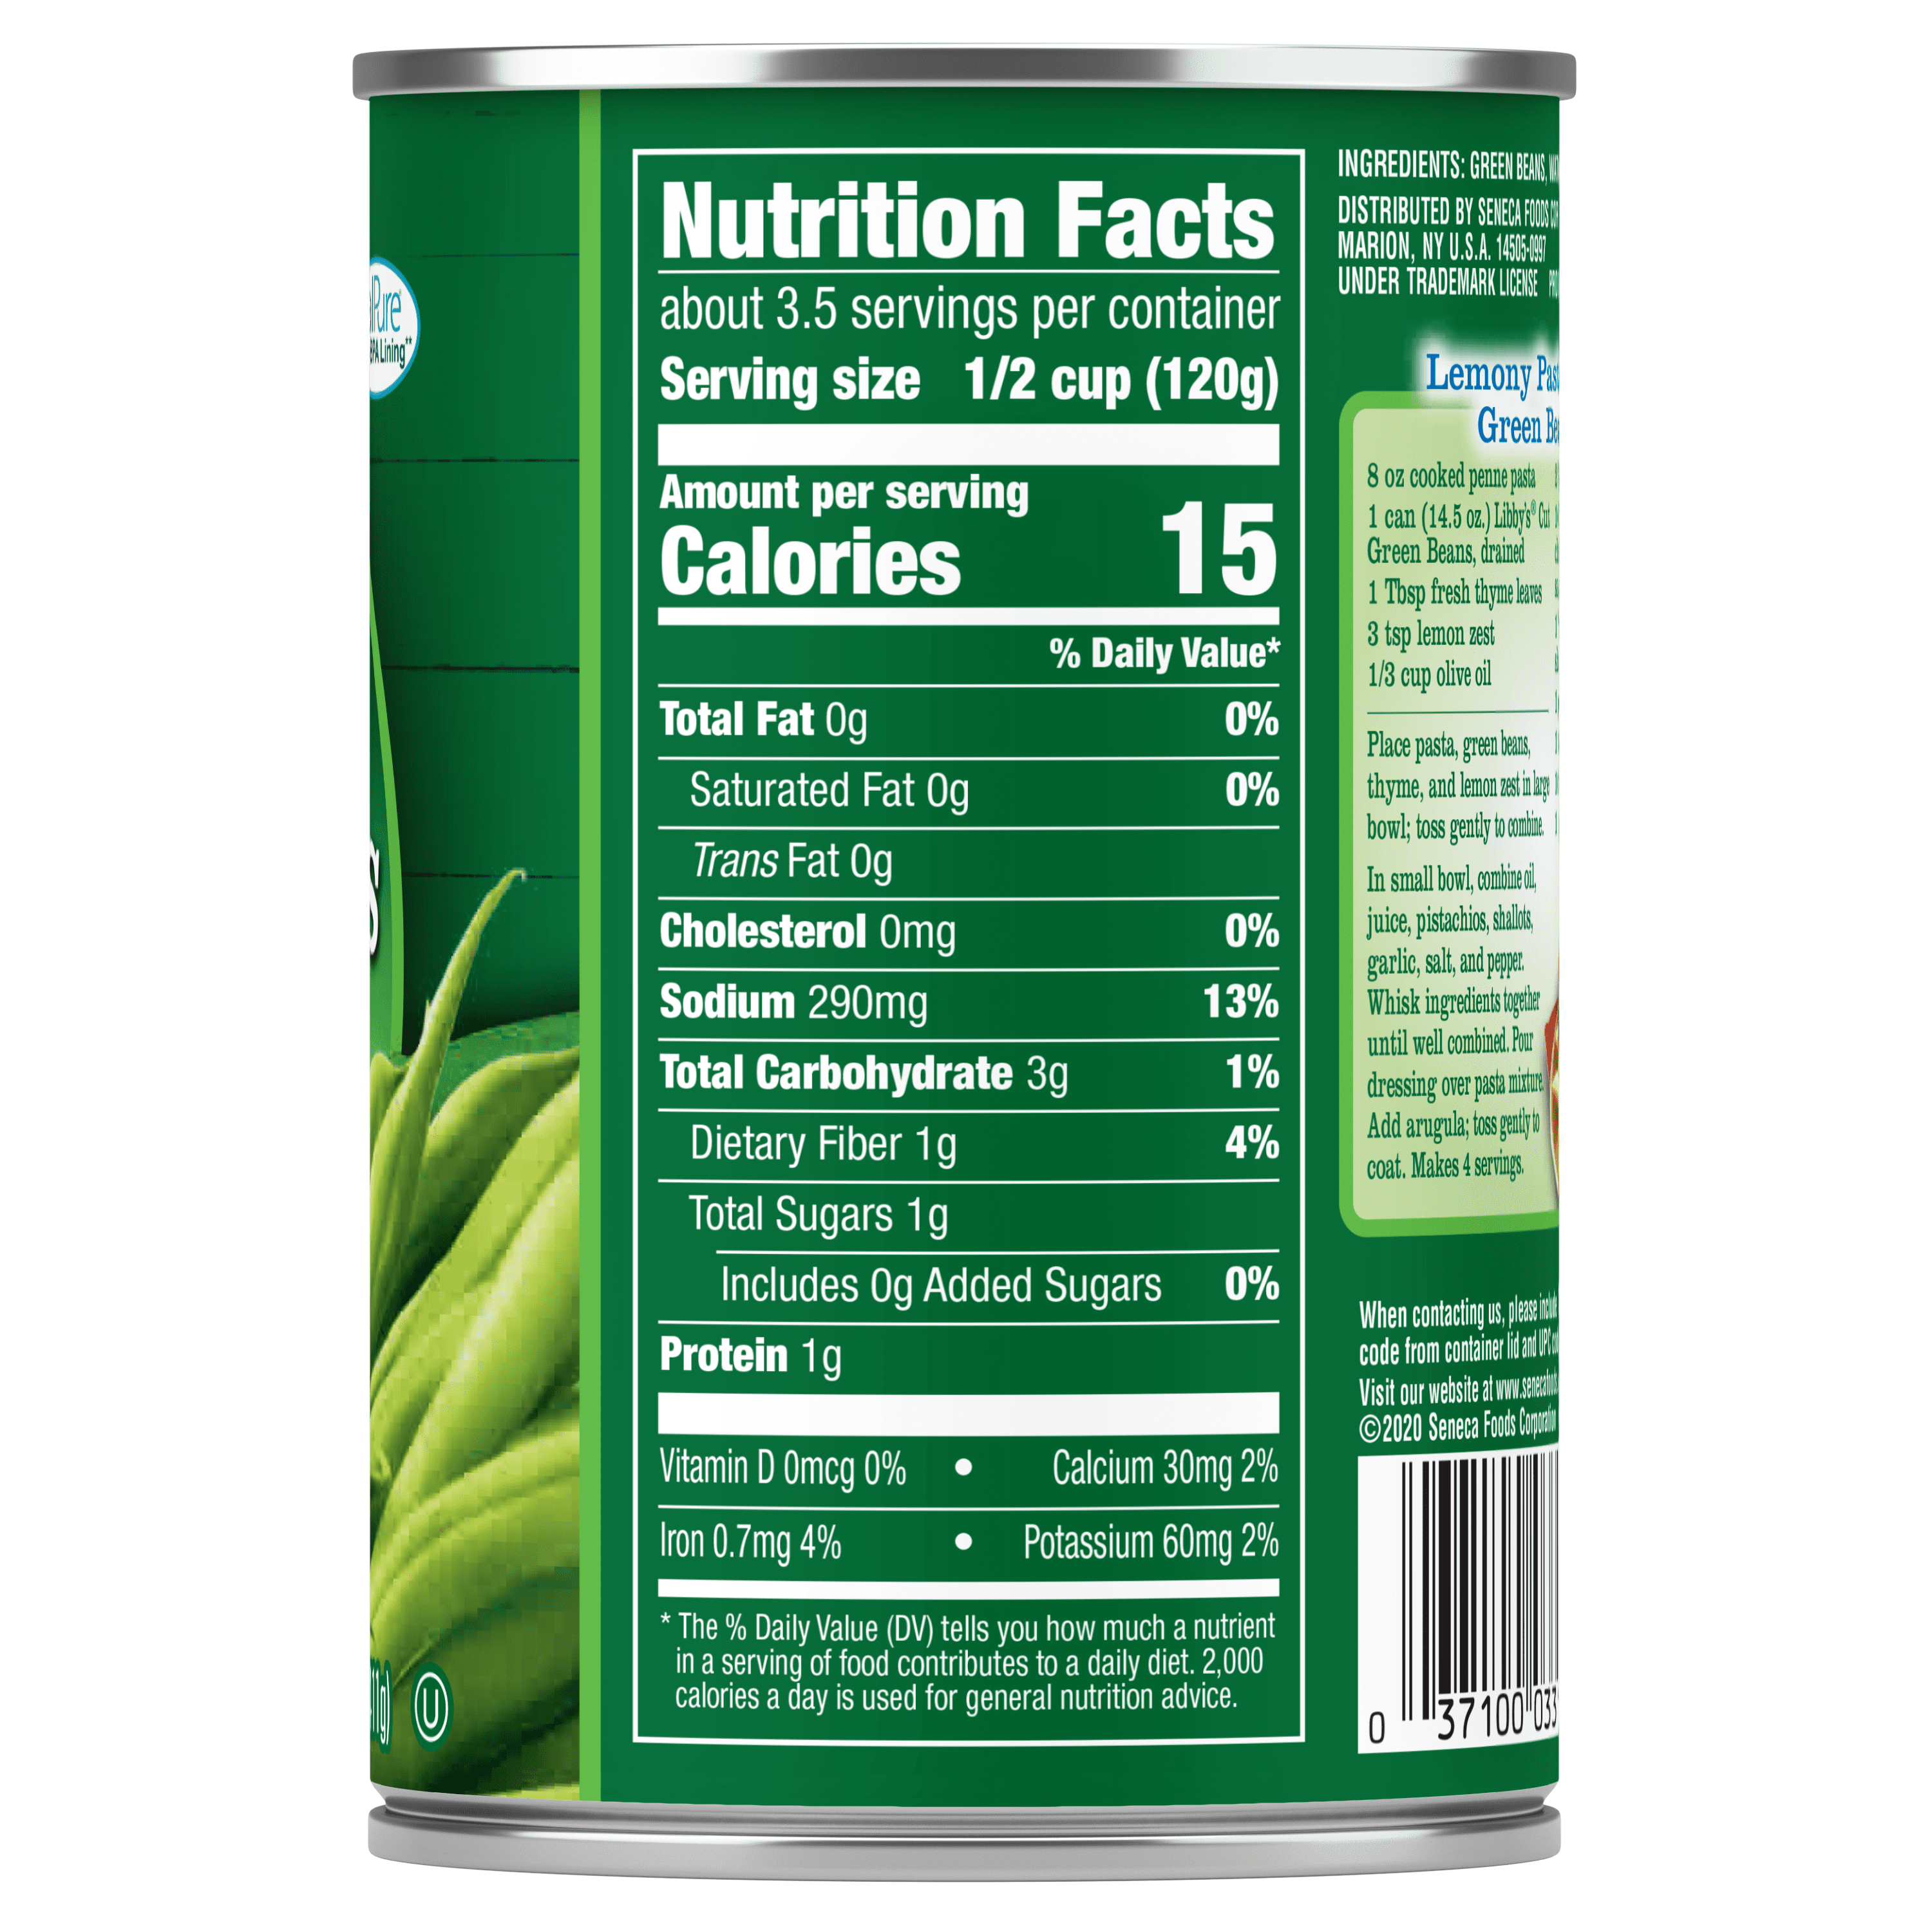 Libby's Canned Green Beans, Libby's Cut Green Beans Nutrition Facts panel, NFP, nutritional content